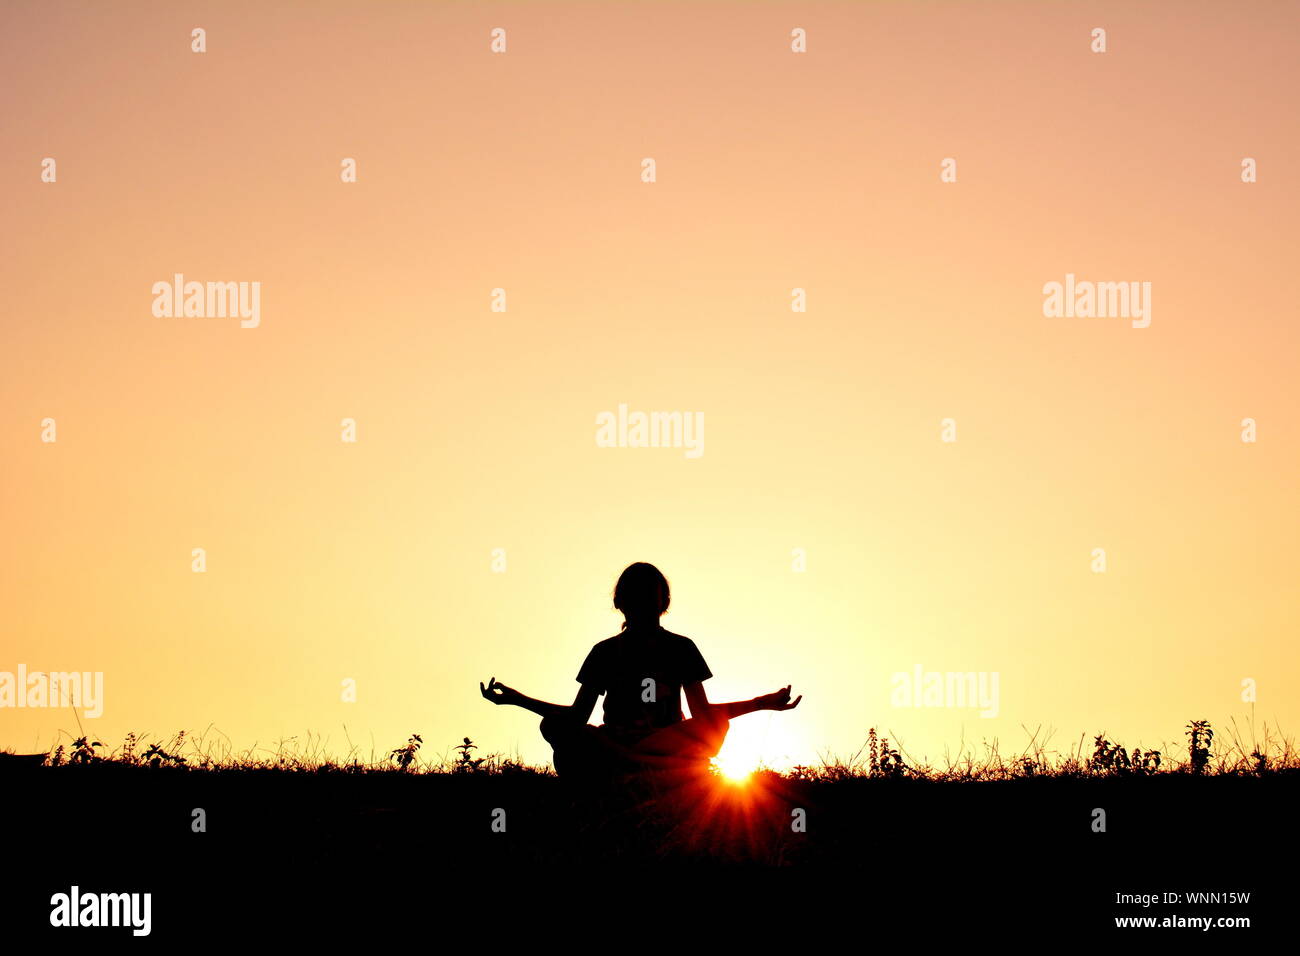 Person In Lotus Position At Sunset Stock Photo